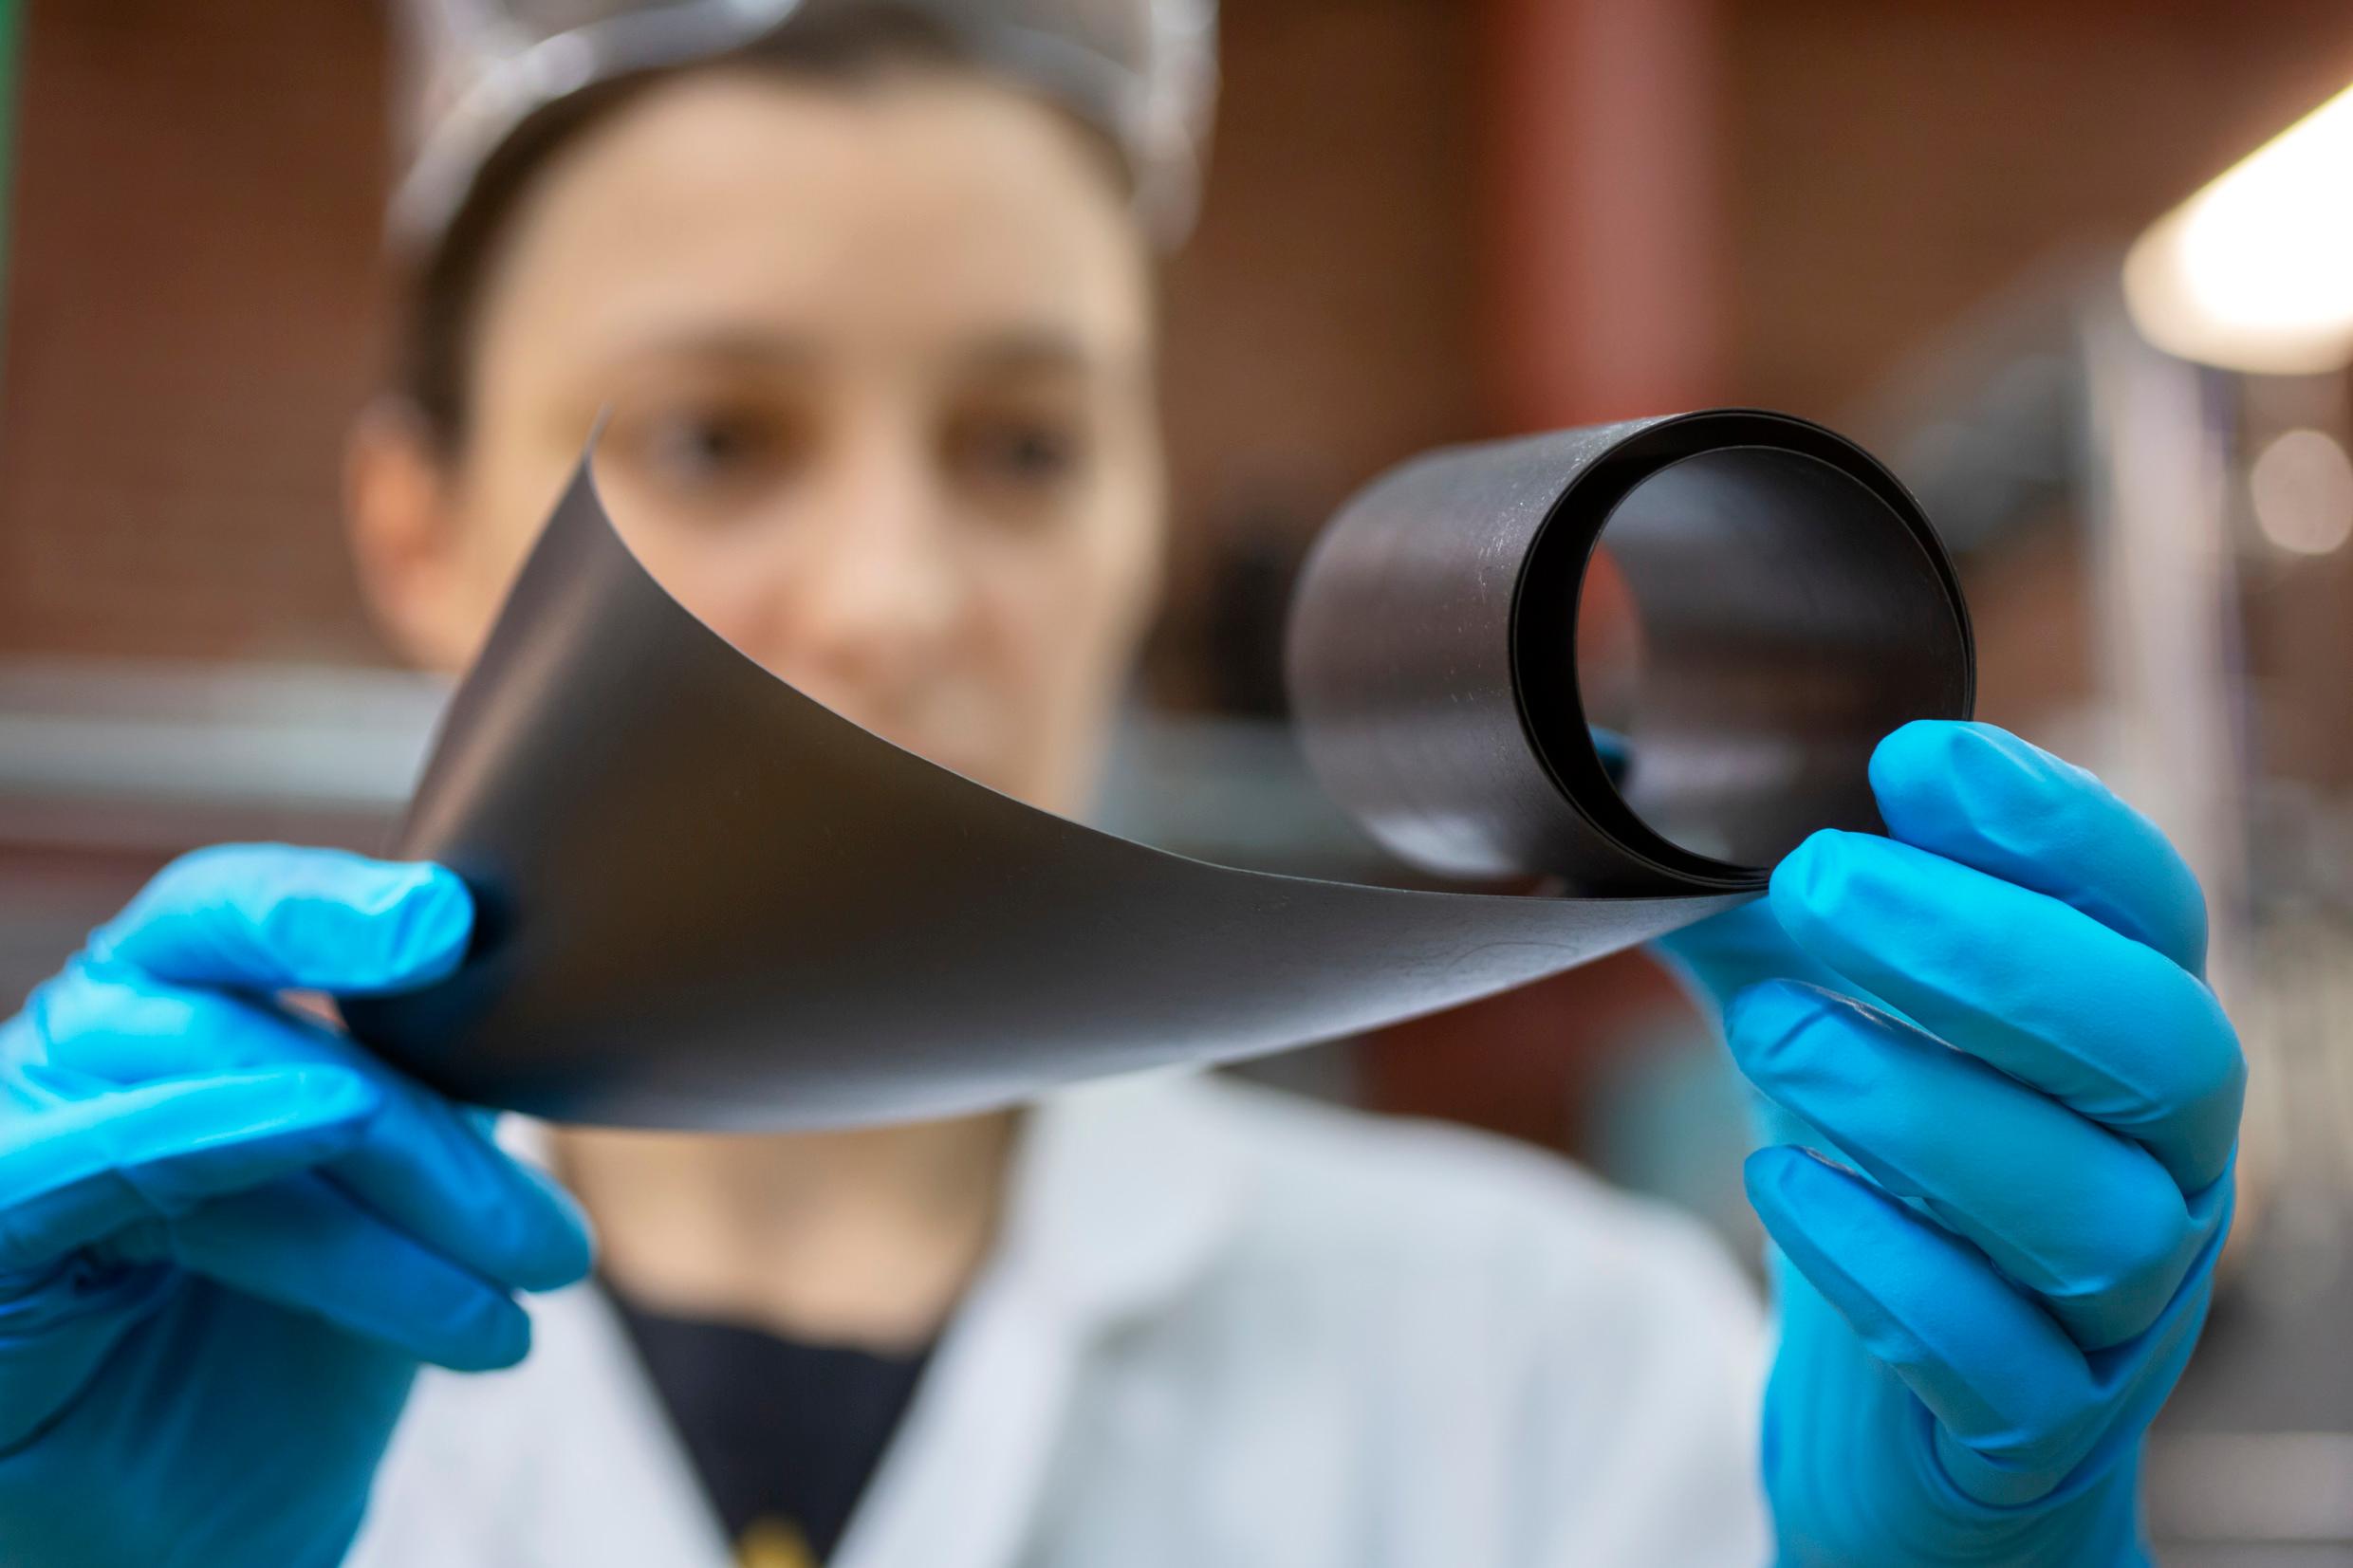 The material graphene, similar to graphite, consists of a single layer of carbon atoms arranged in a hexagonal pattern, which makes it extremely strong, yet lightweight and flexible. There is intense research on various applications for the material, for example at Chalmers University of Technology in Gothenburg.